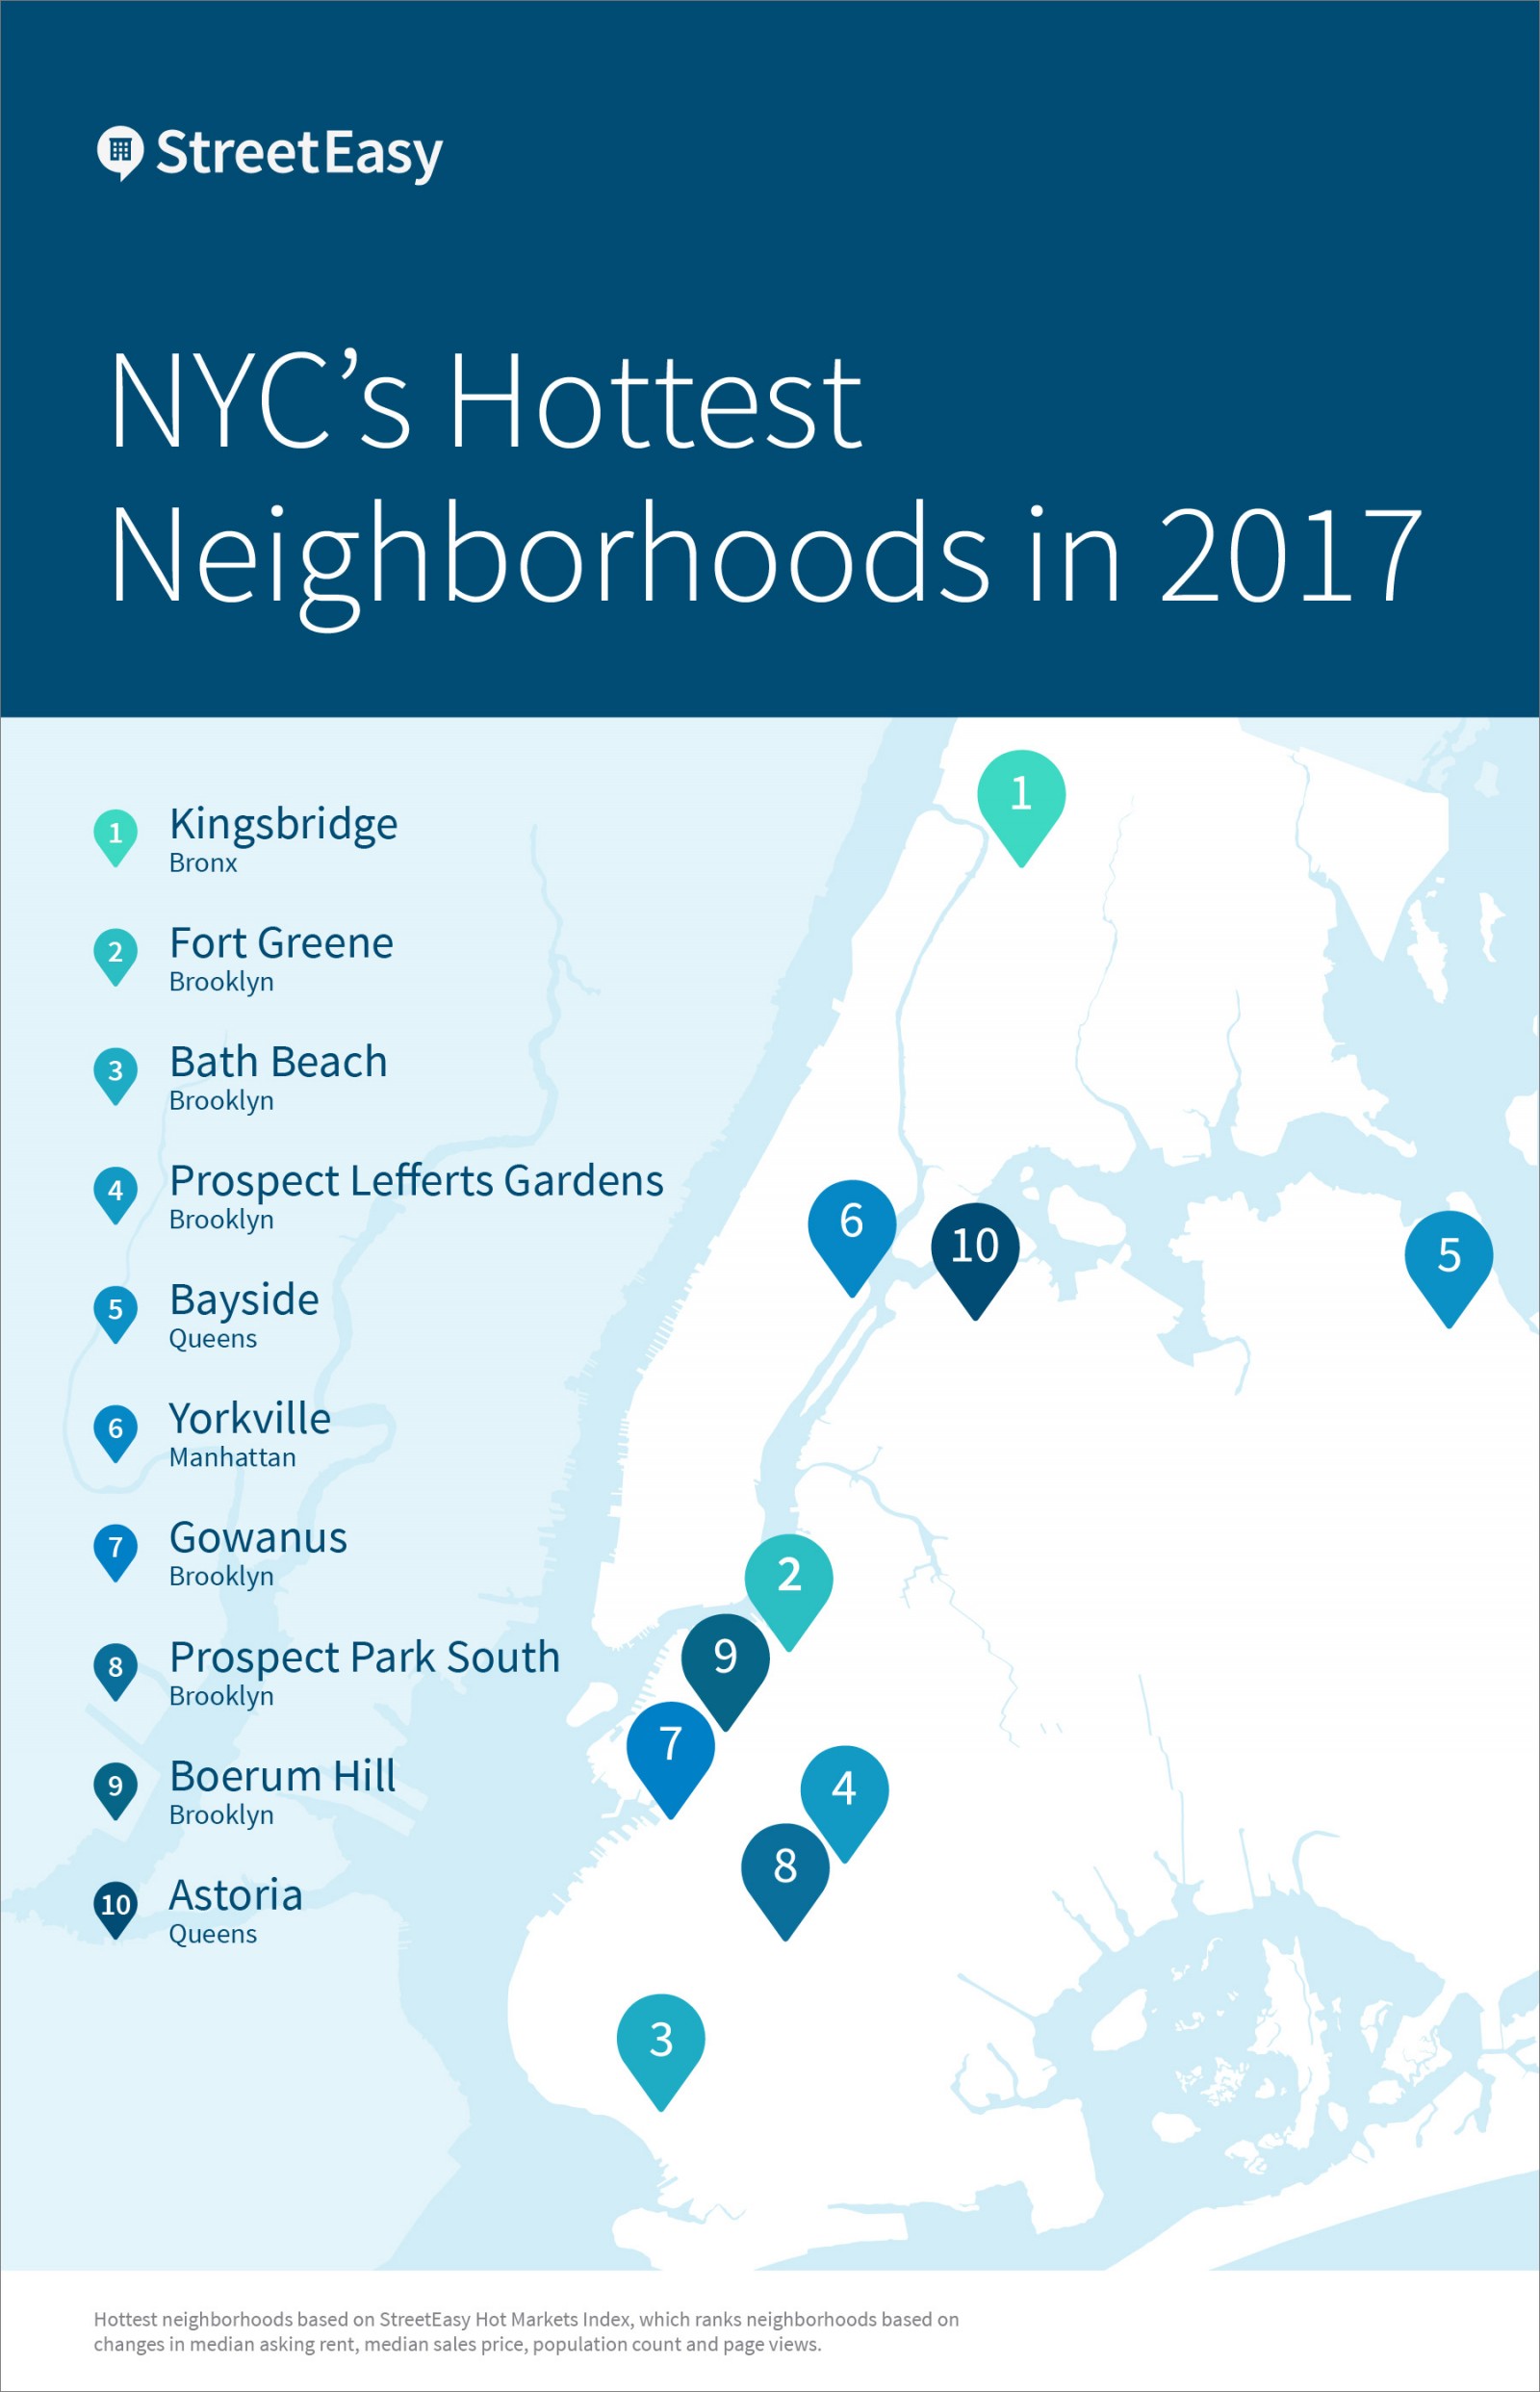 Fort Greene Predicted To Be The Hottest Brooklyn Neighborhood in 2017